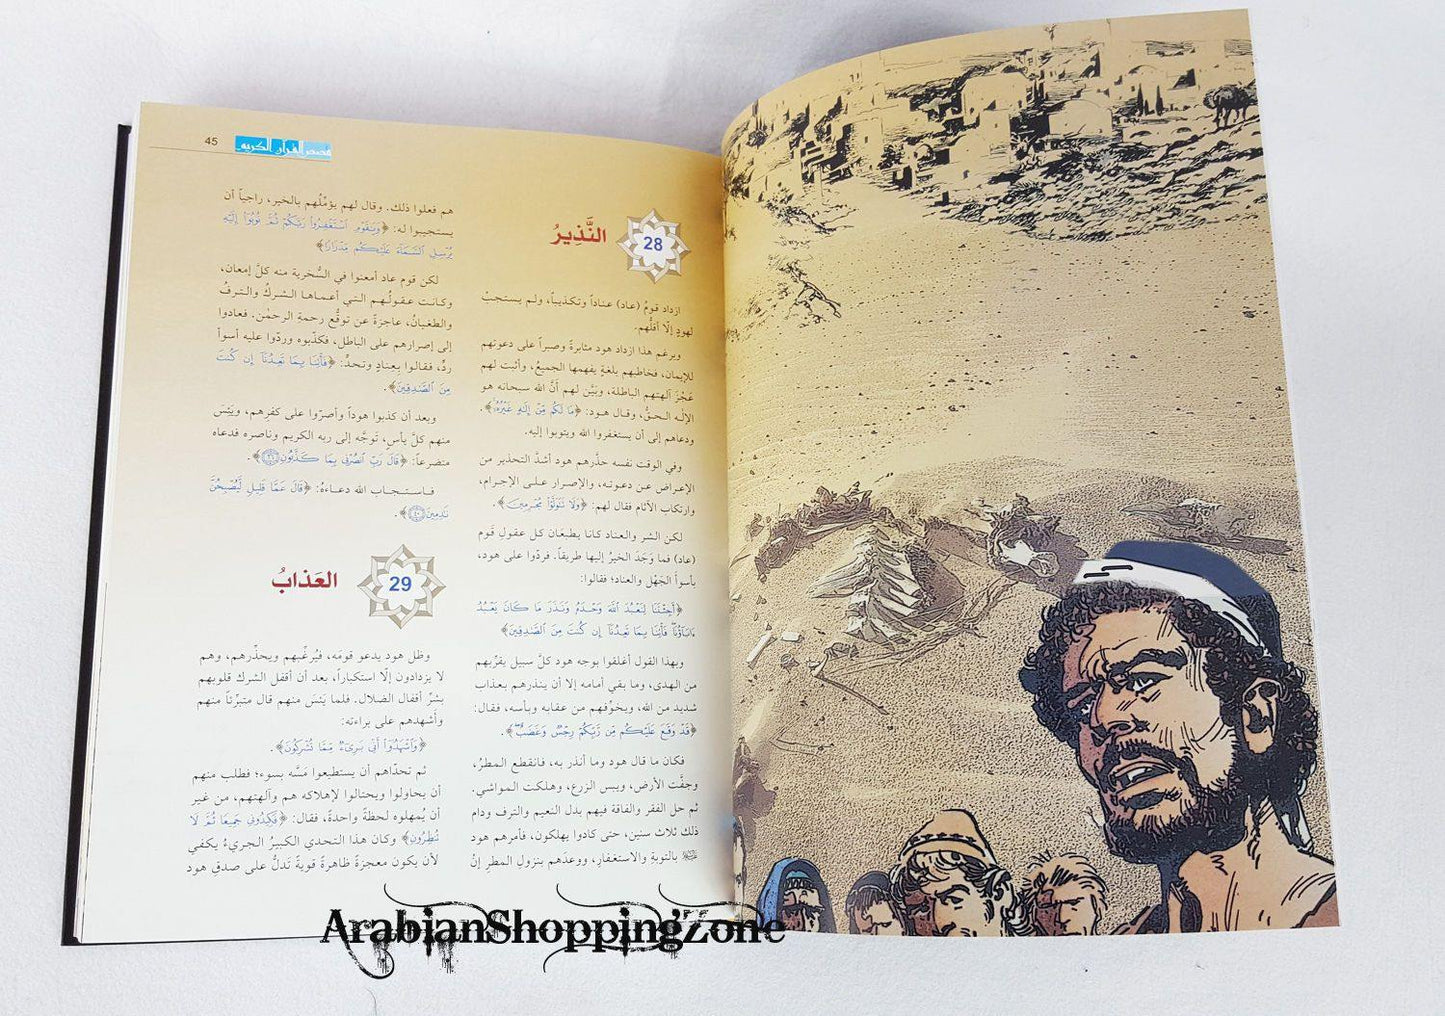 The Best Stories of The Noble Quran - Arabic by Ahmed al-Qubeysi  XL SIZE - Arabian Shopping Zone